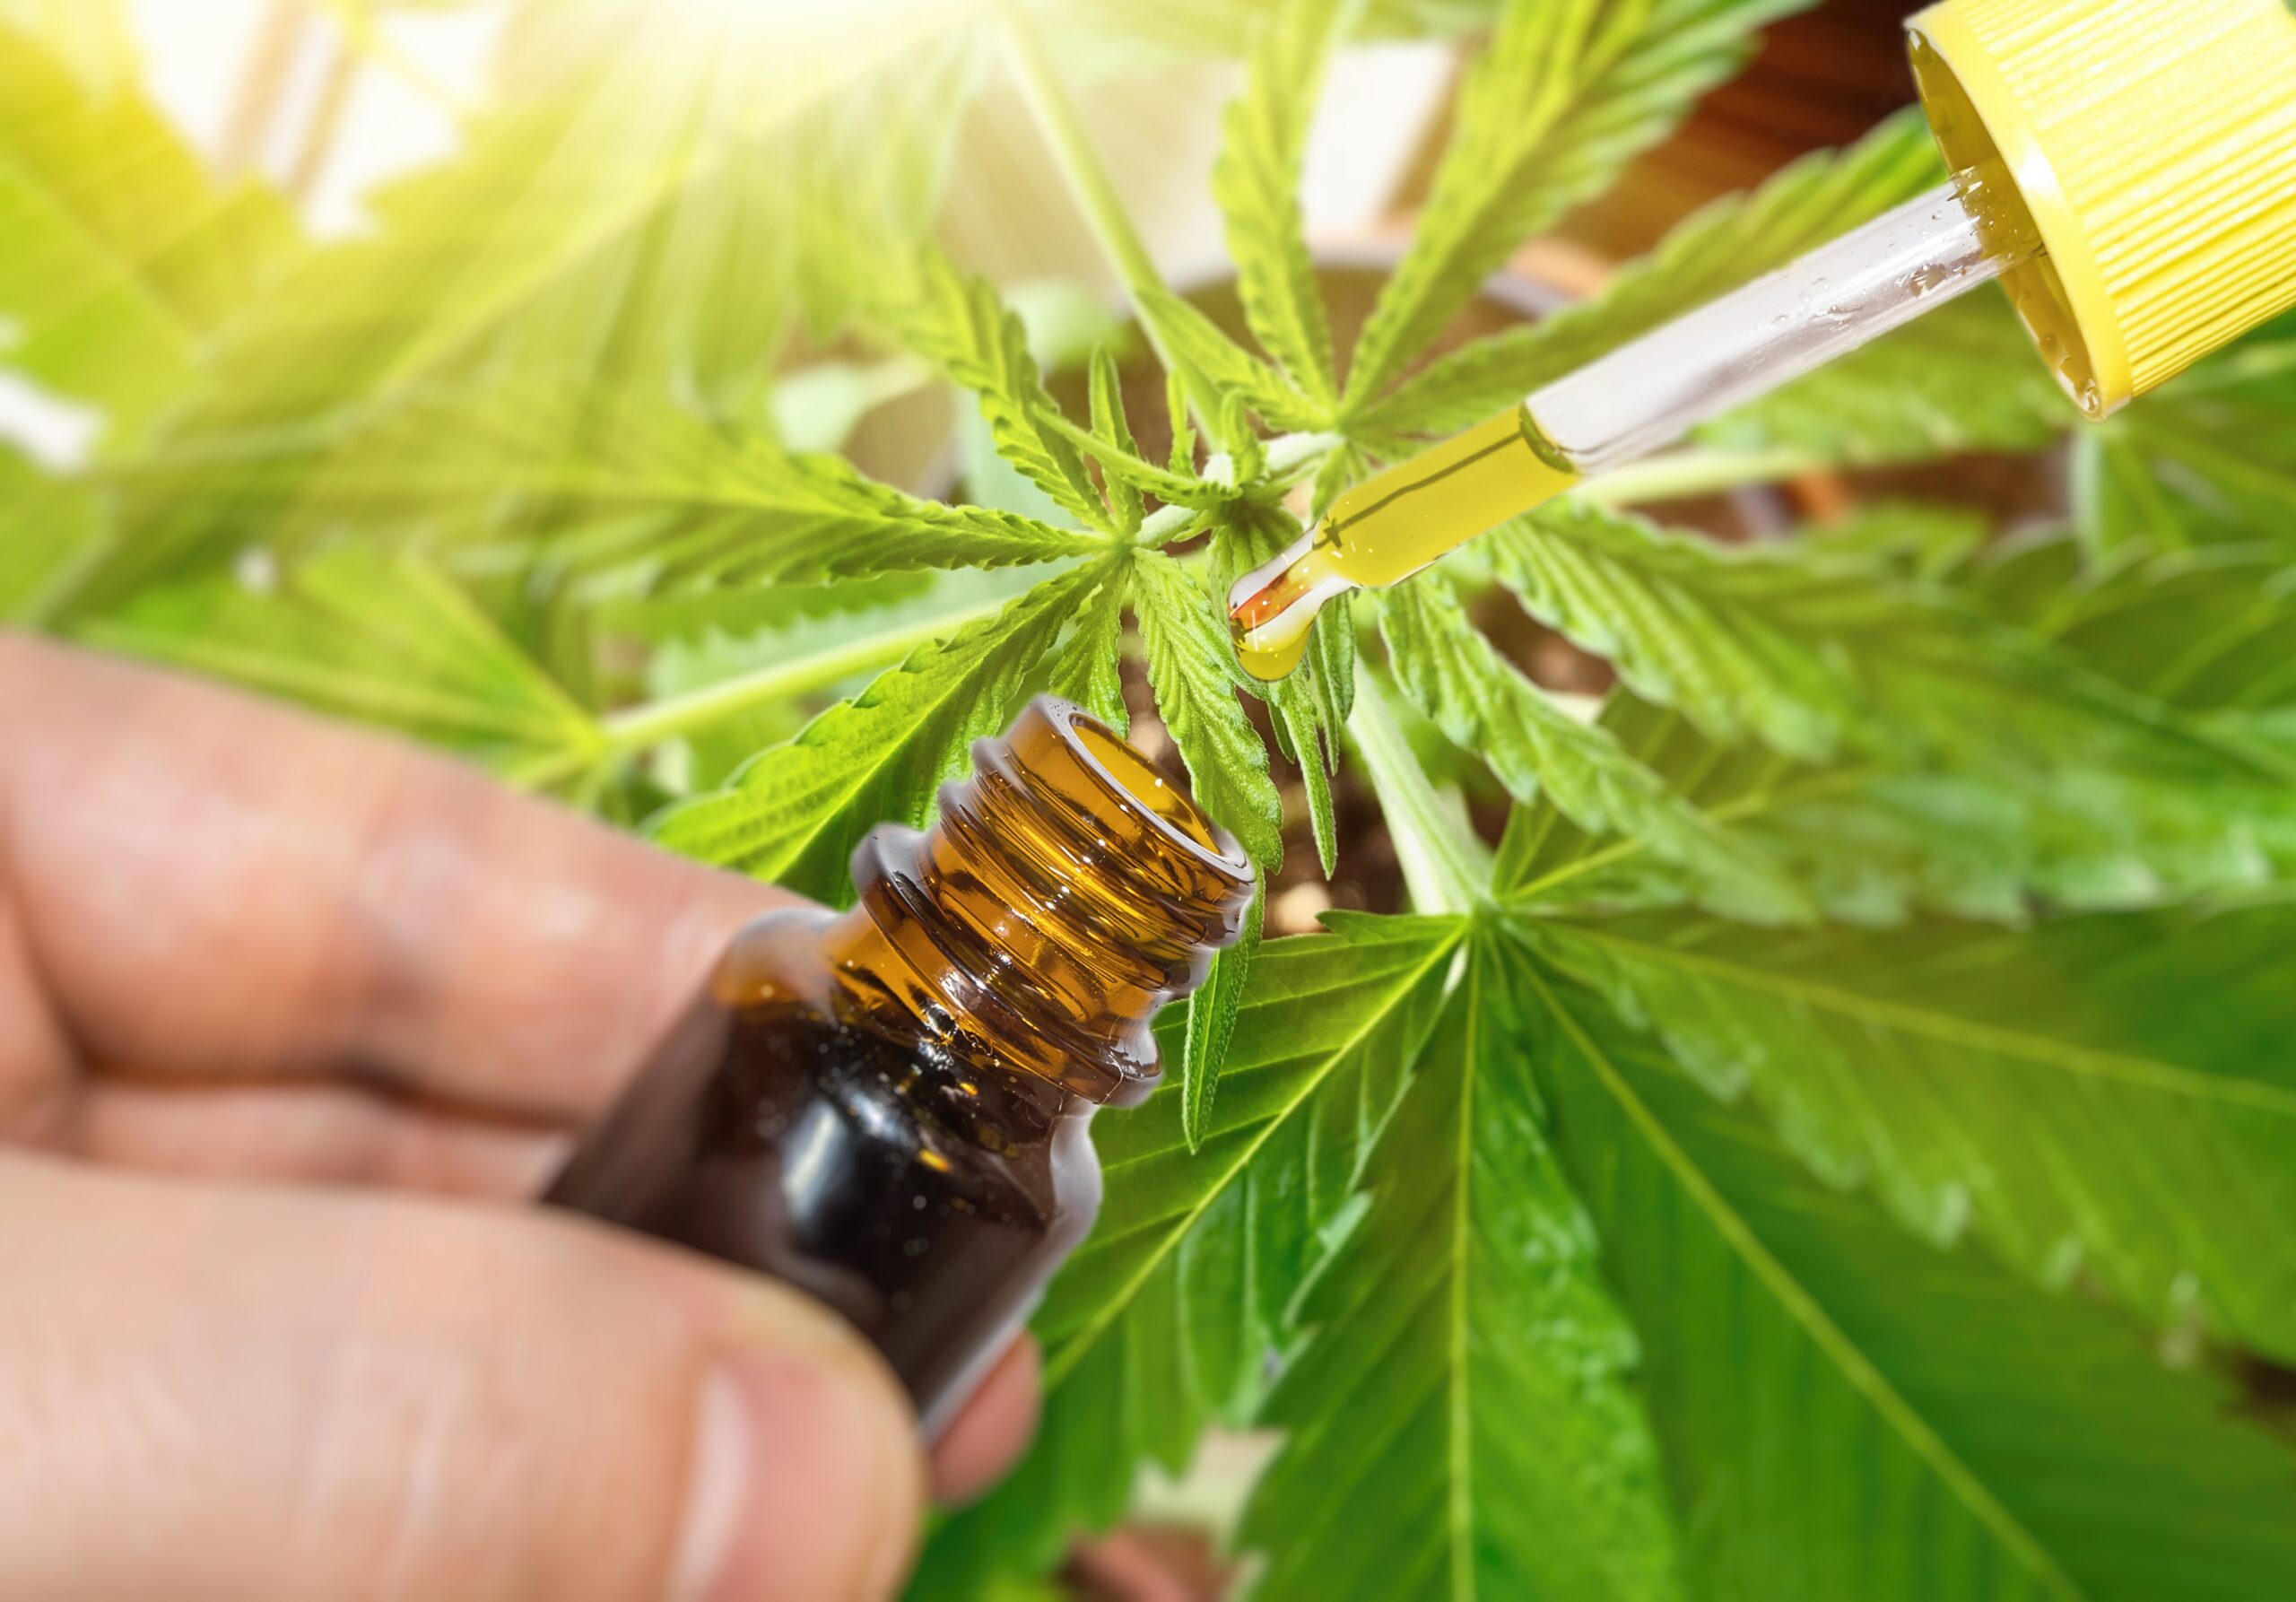 7 BENEFITS AND USES OF CBD OIL